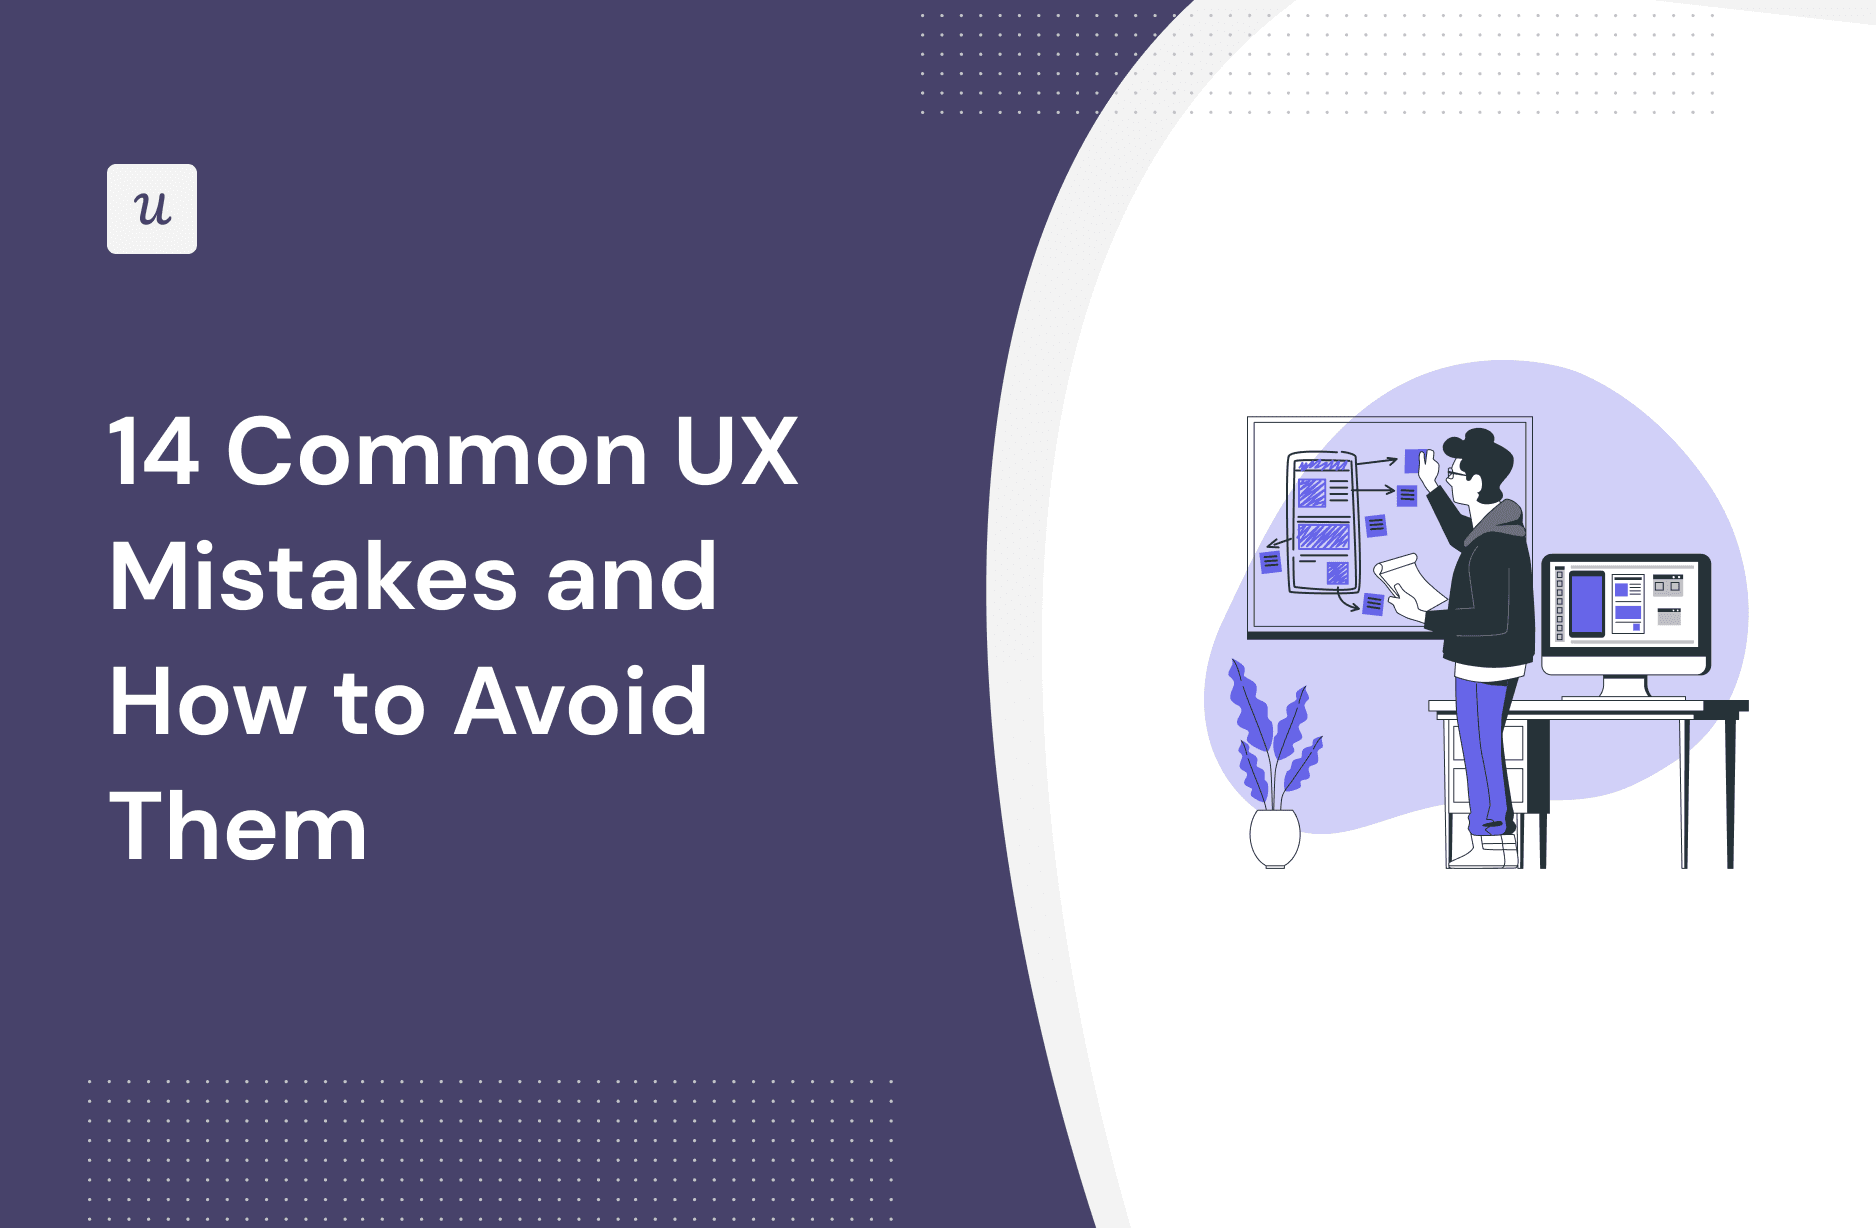 14 Common UX Mistakes and How to Avoid Them cover